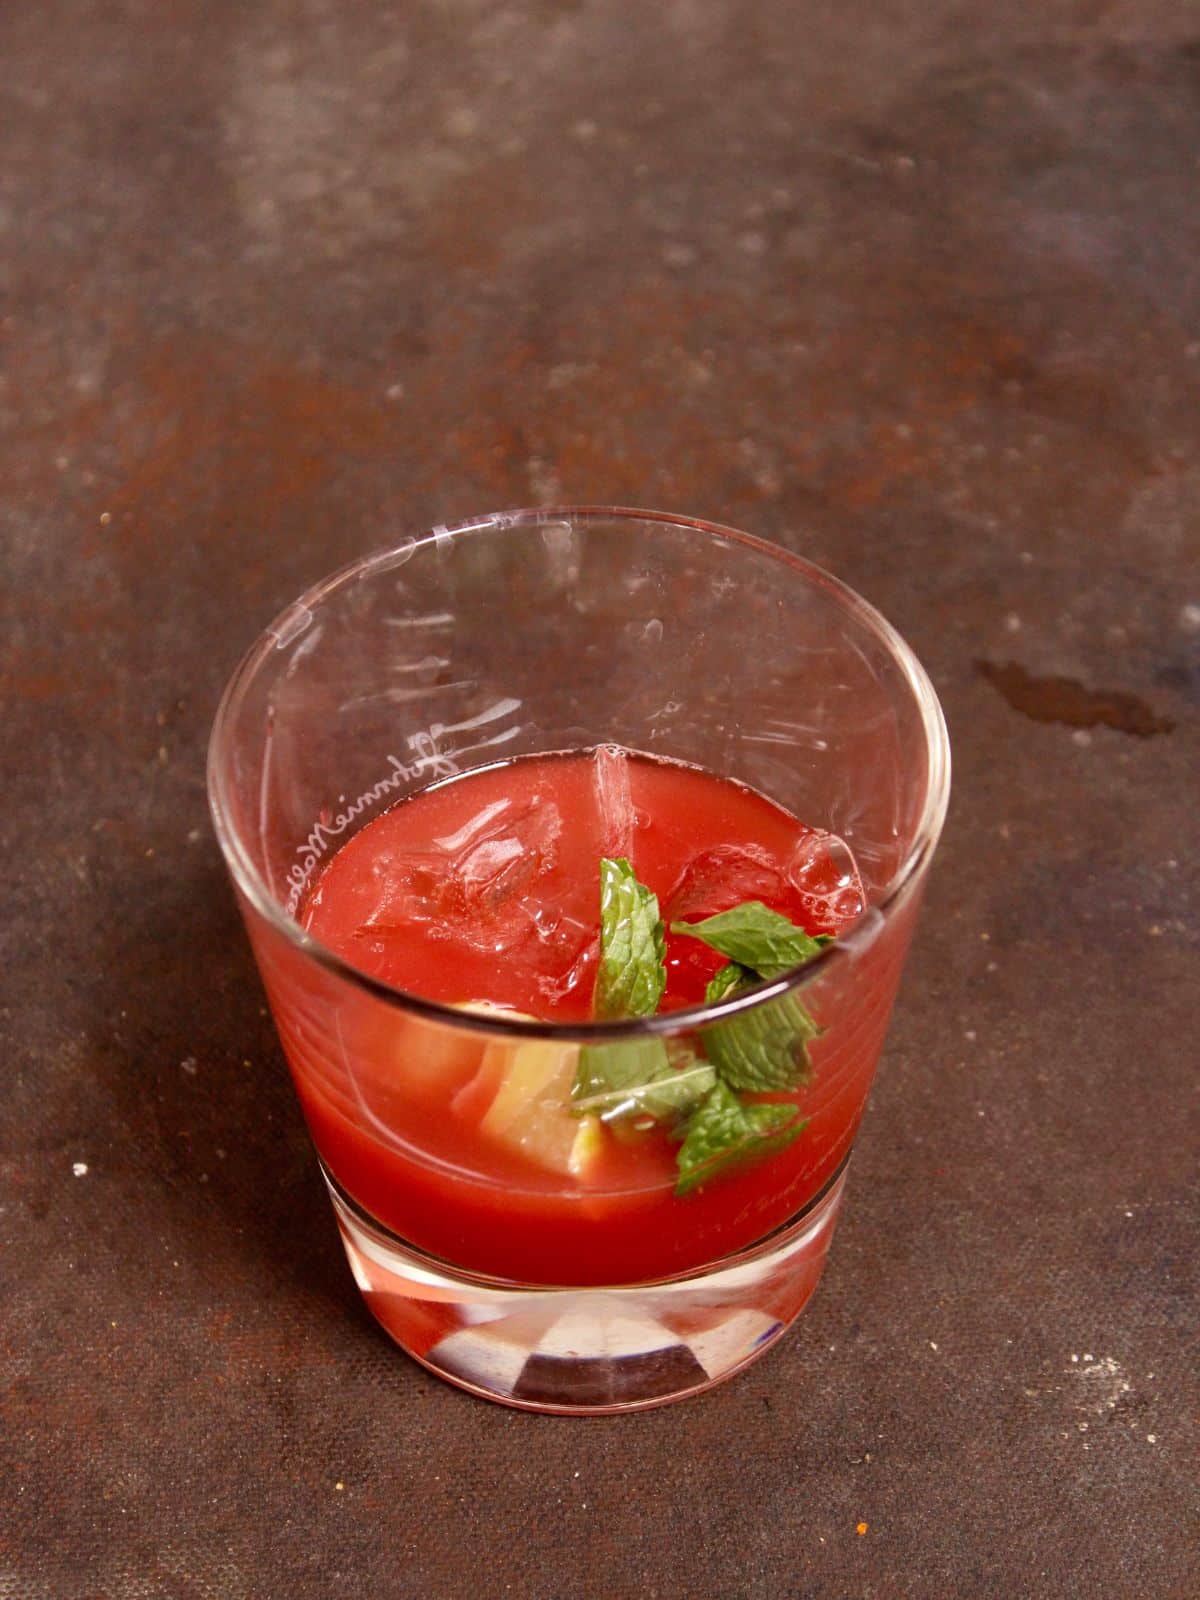 pour watermelon extract to the glass